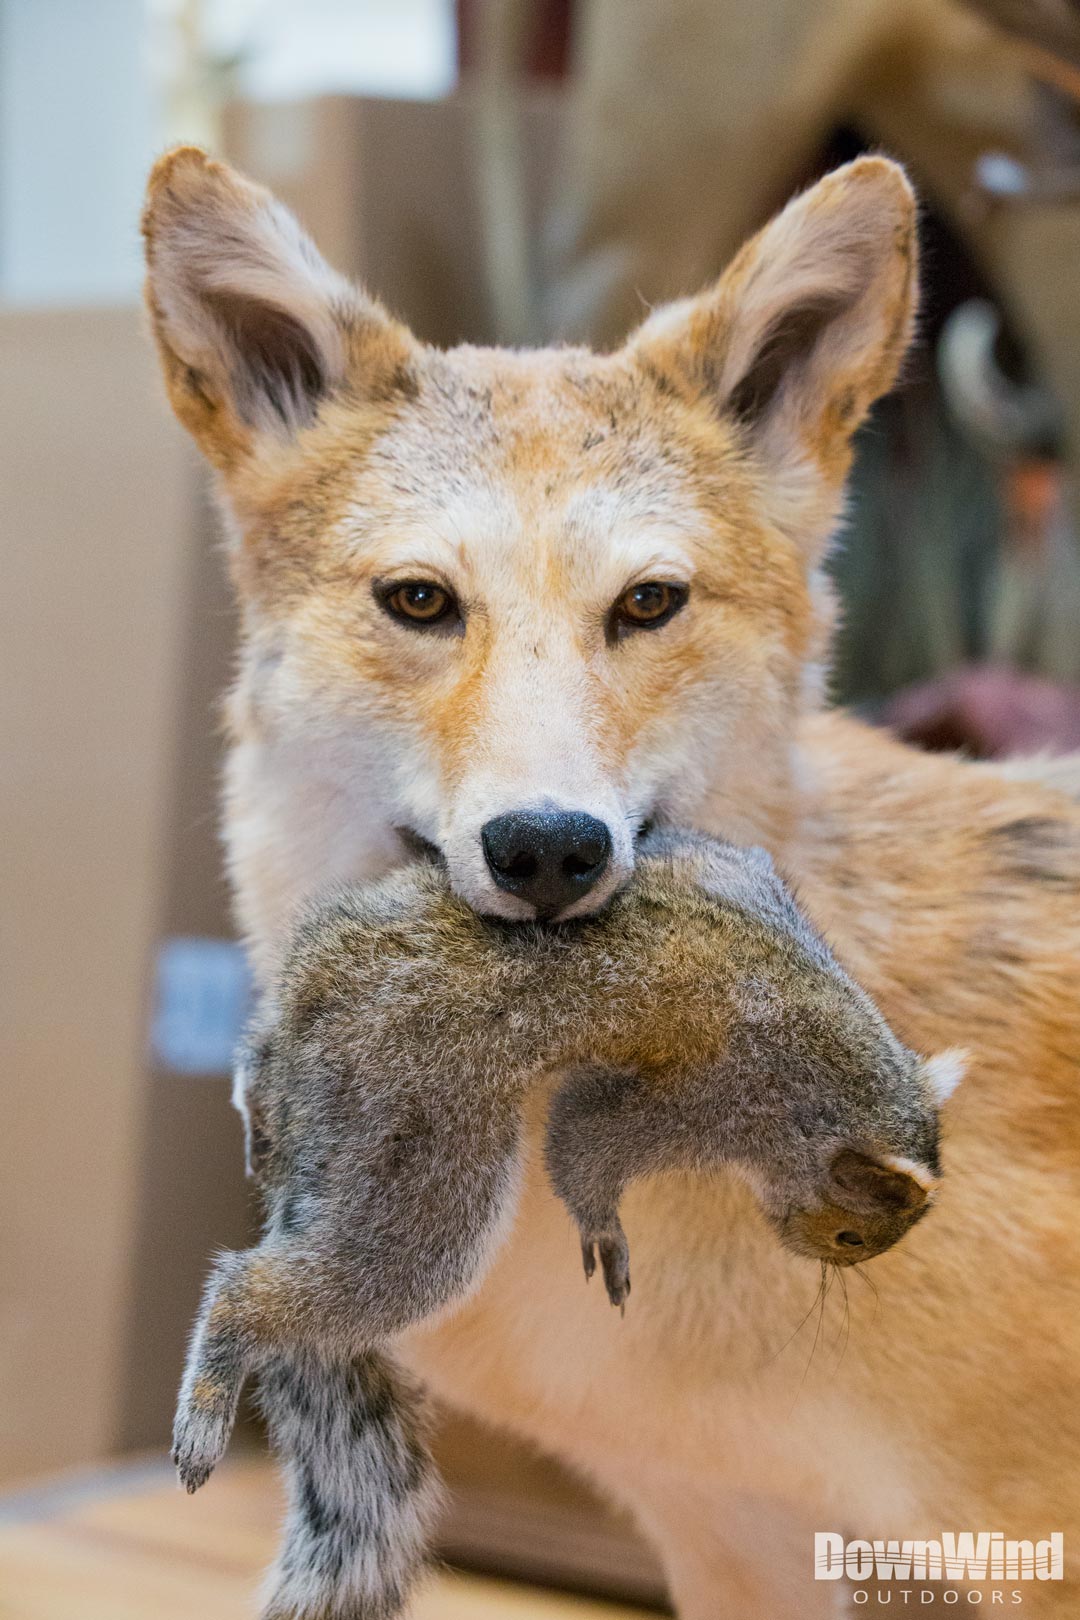 Coyote mount - Taxidermy - Hunting New York - NY Empire State